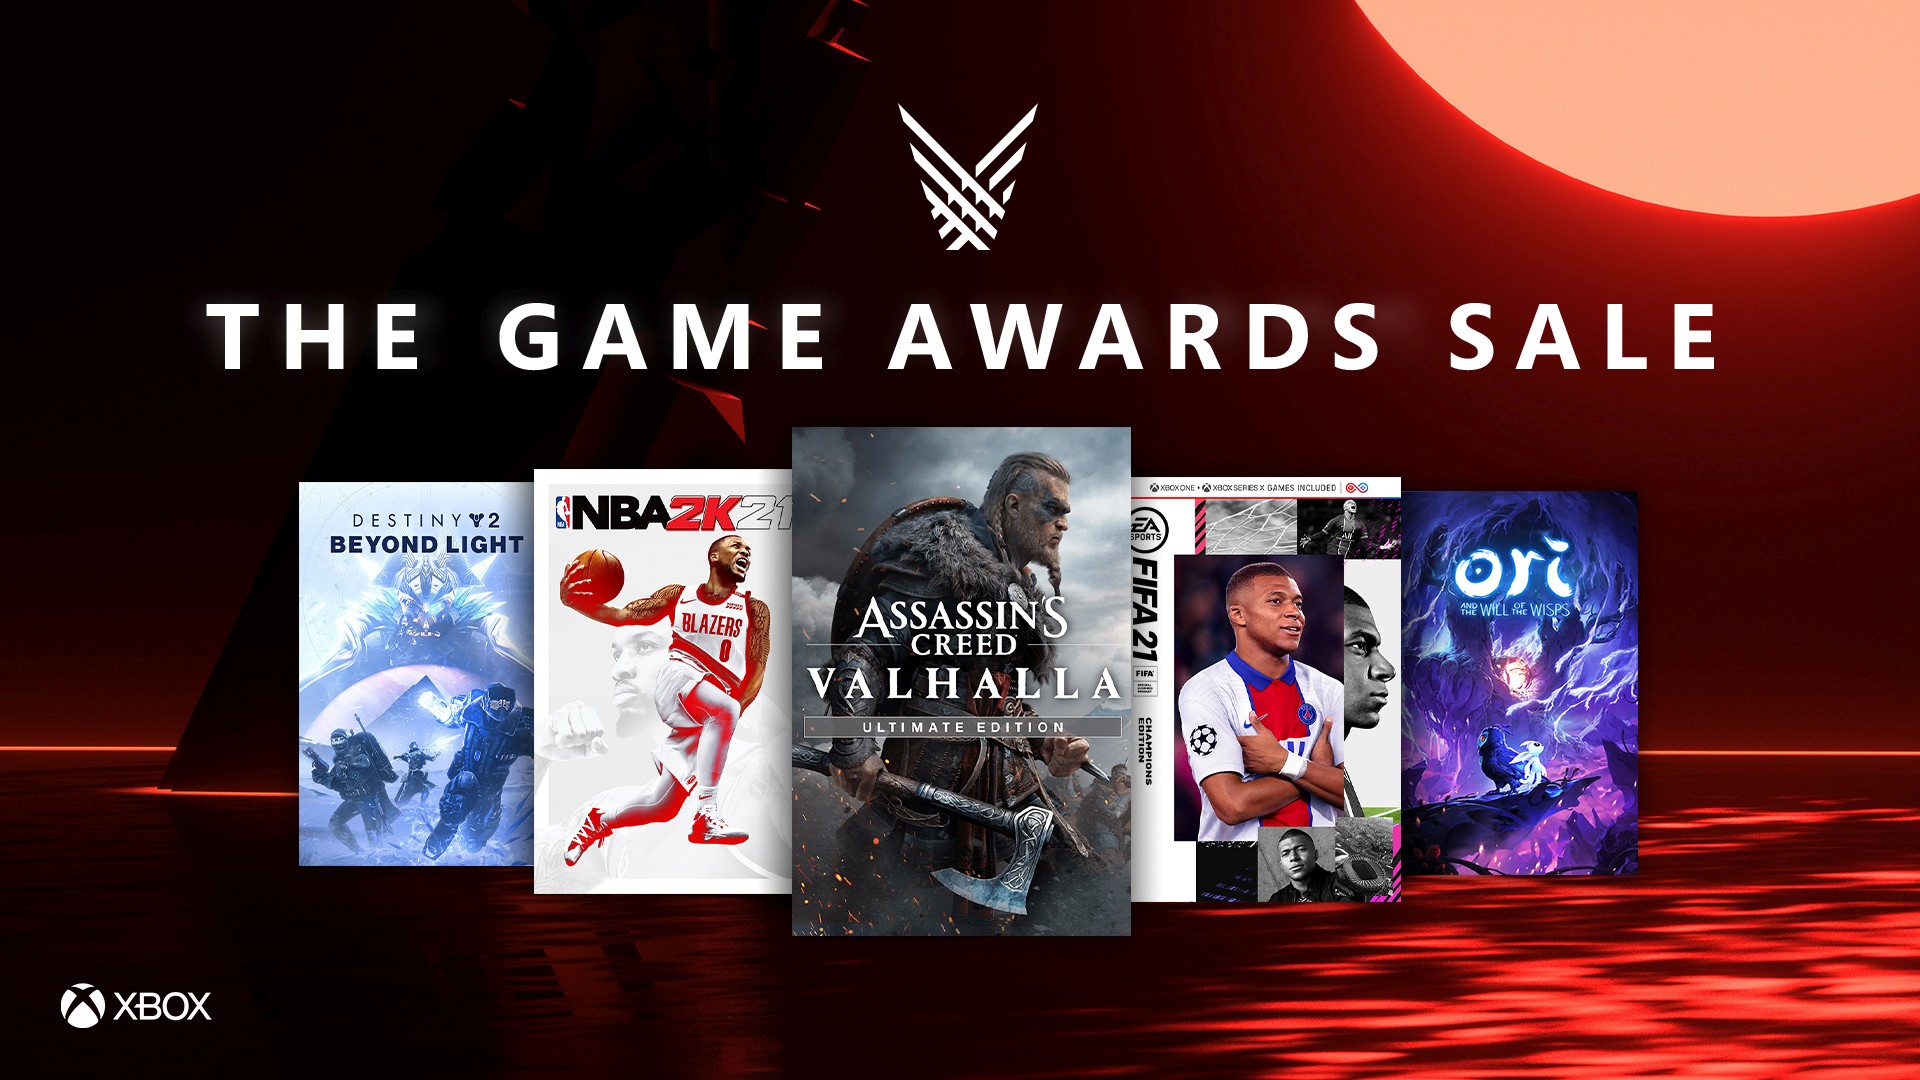 The Game Awards Sale Hero Image